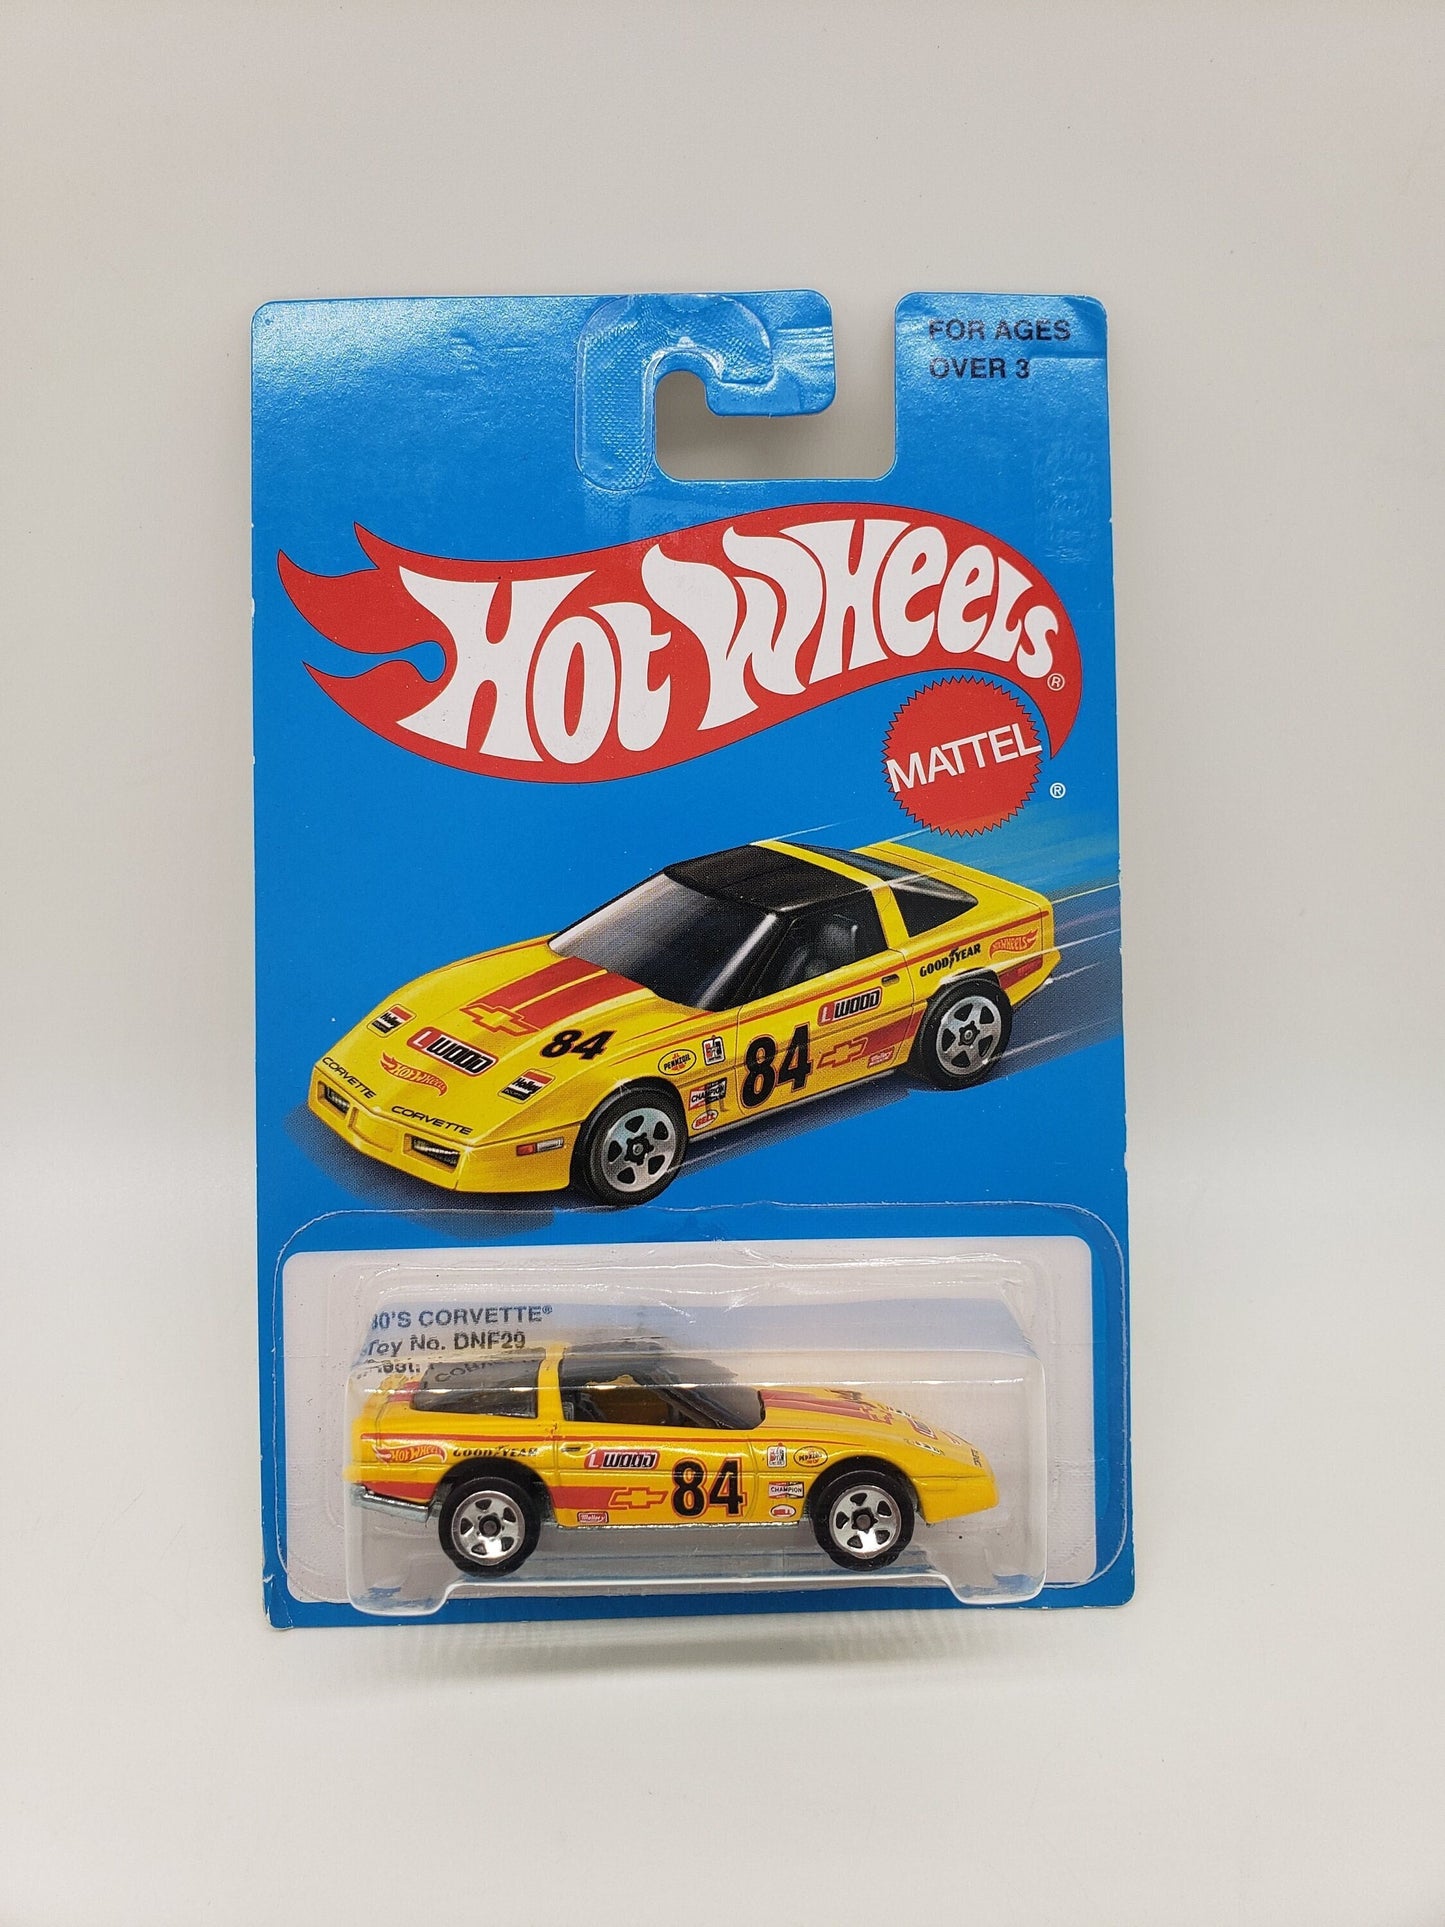 Hot Wheels 80's Corvette Yellow Retro Style Perfect Birthday Gift Miniature Collectable Scale Model Toy Car